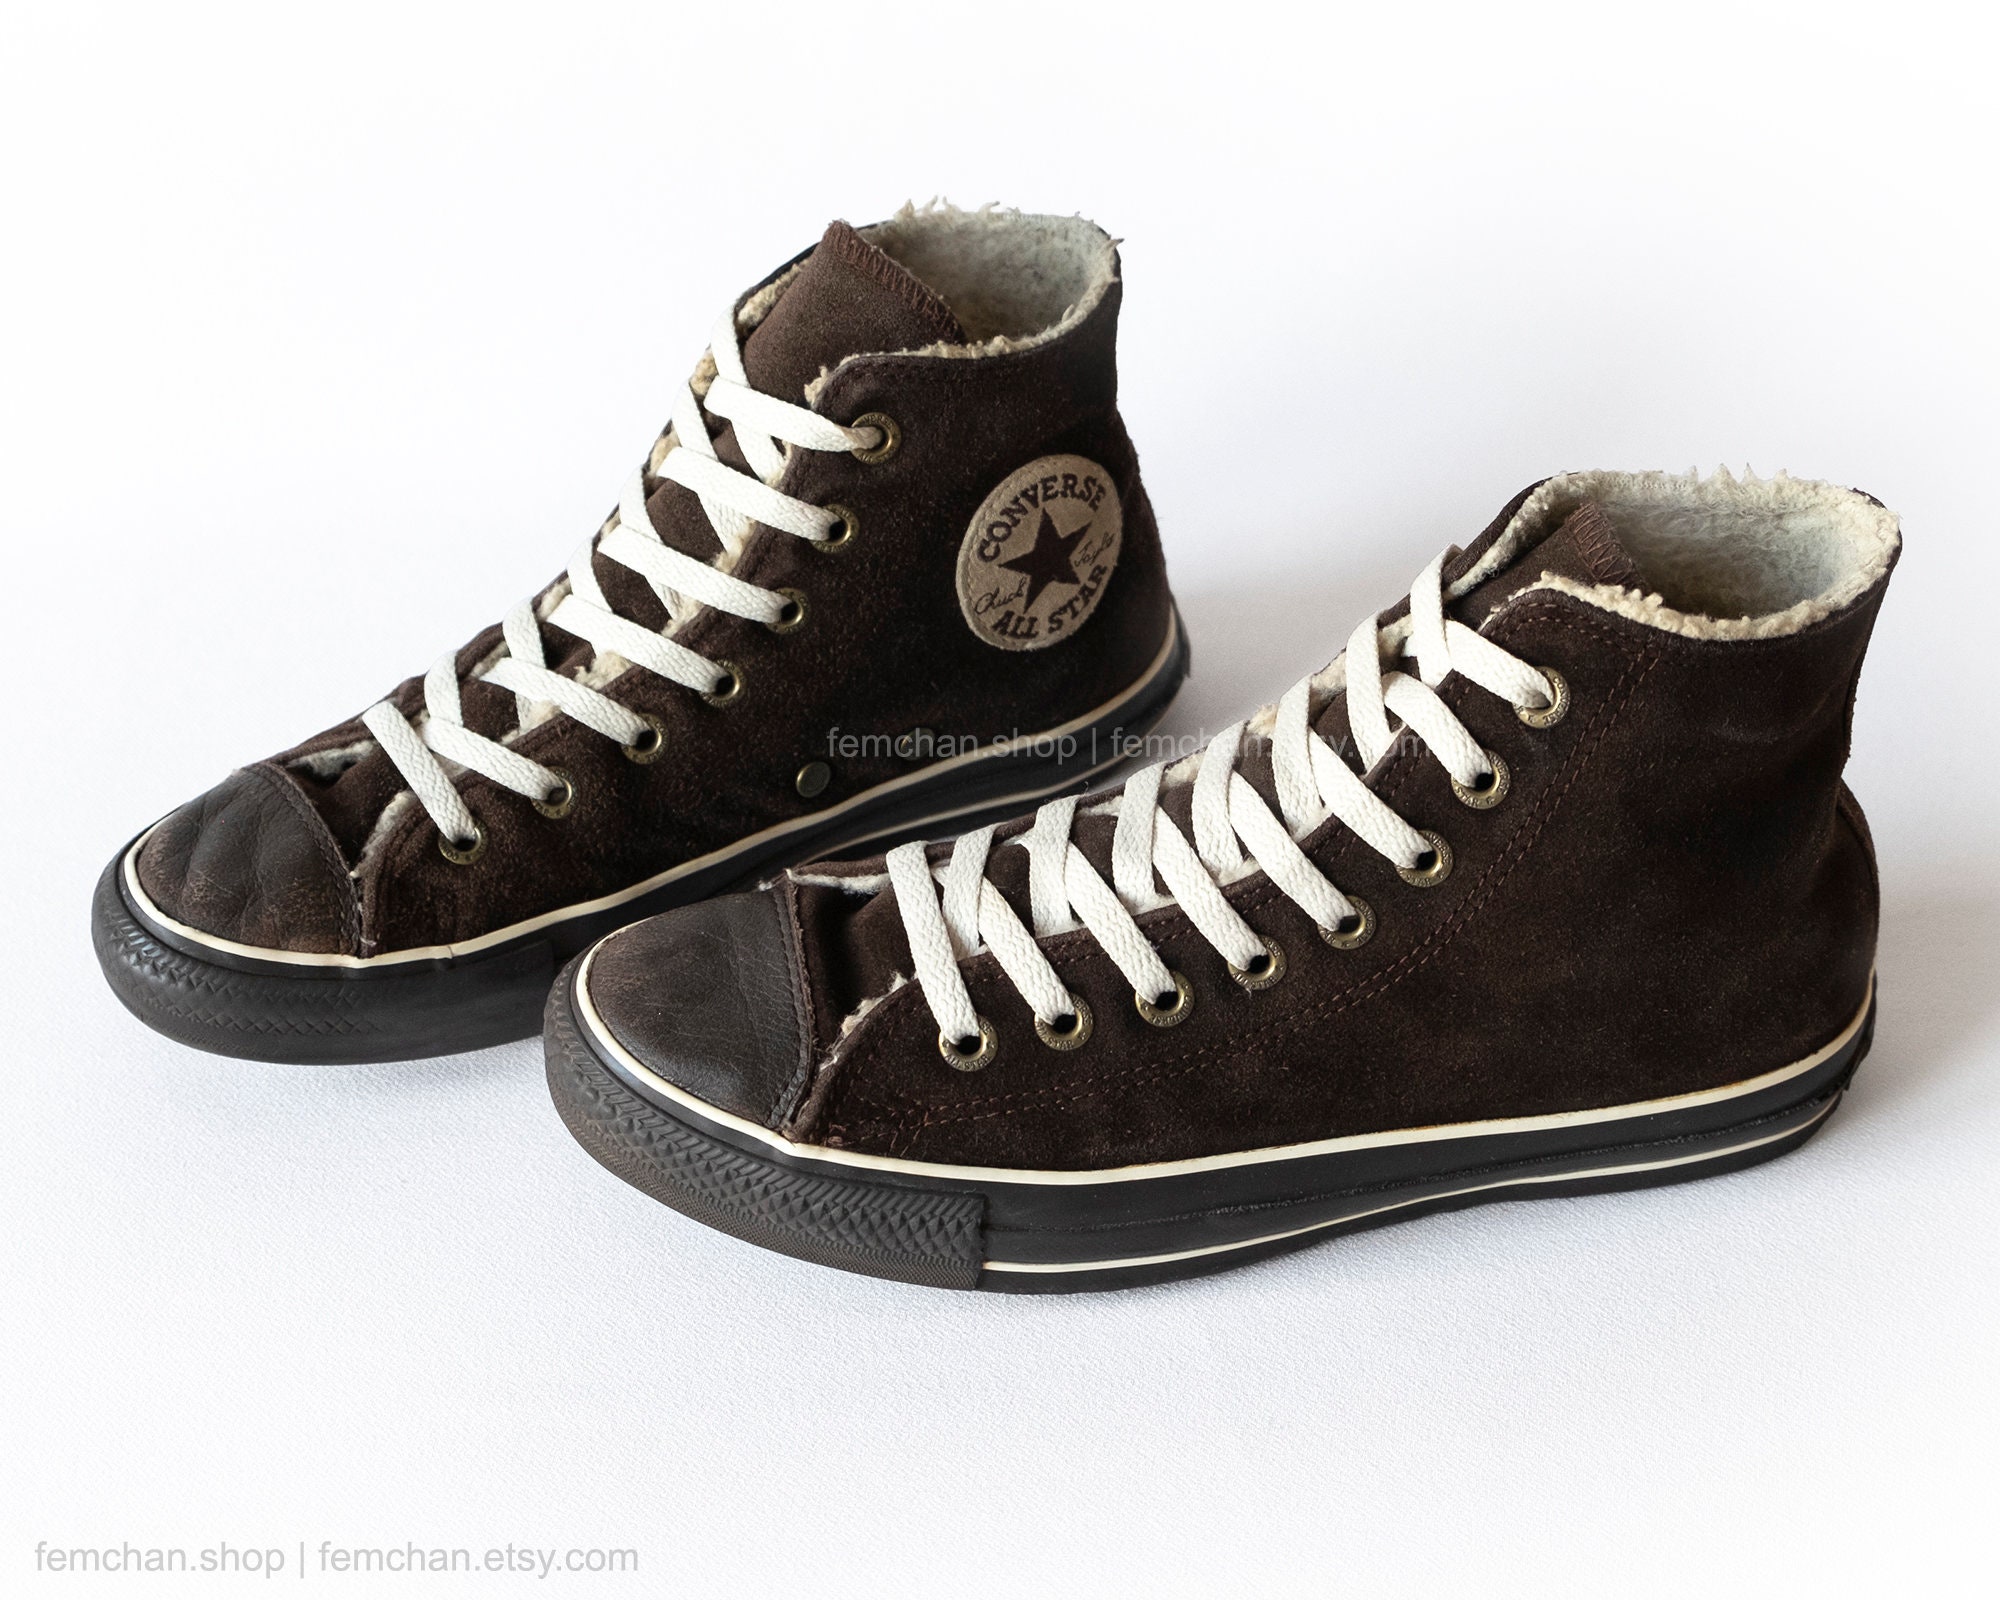 Converse All Stars in Chocolate Brown Suede With Faux Fleece - Etsy